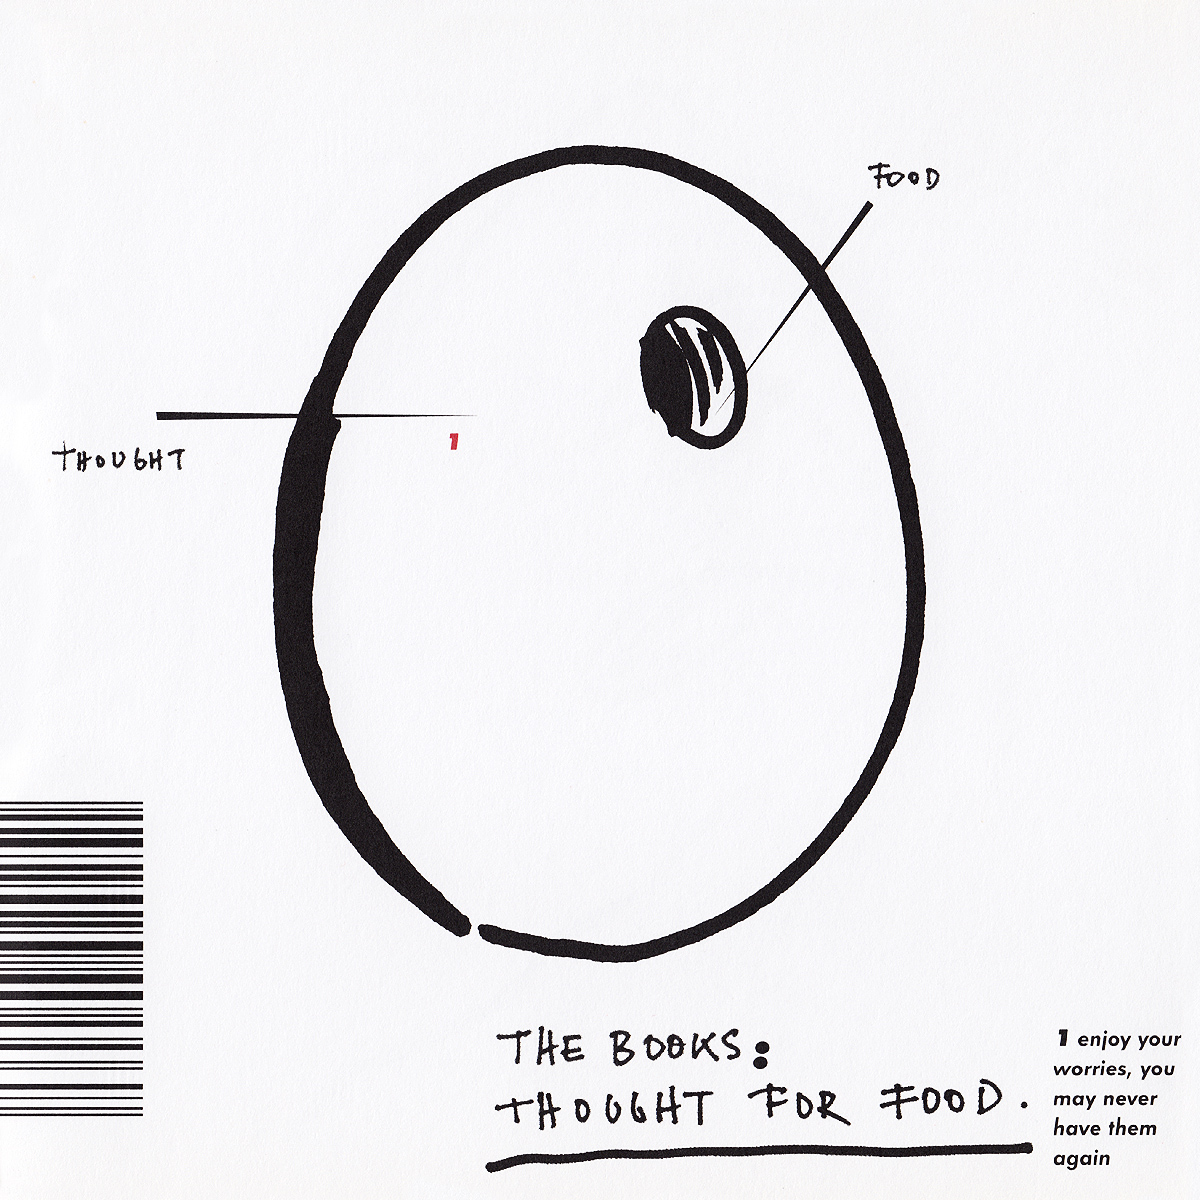 The Books: Though For Food (2002) cover art is an egg shape labeled 'thought' and a cavity labeled 'food'